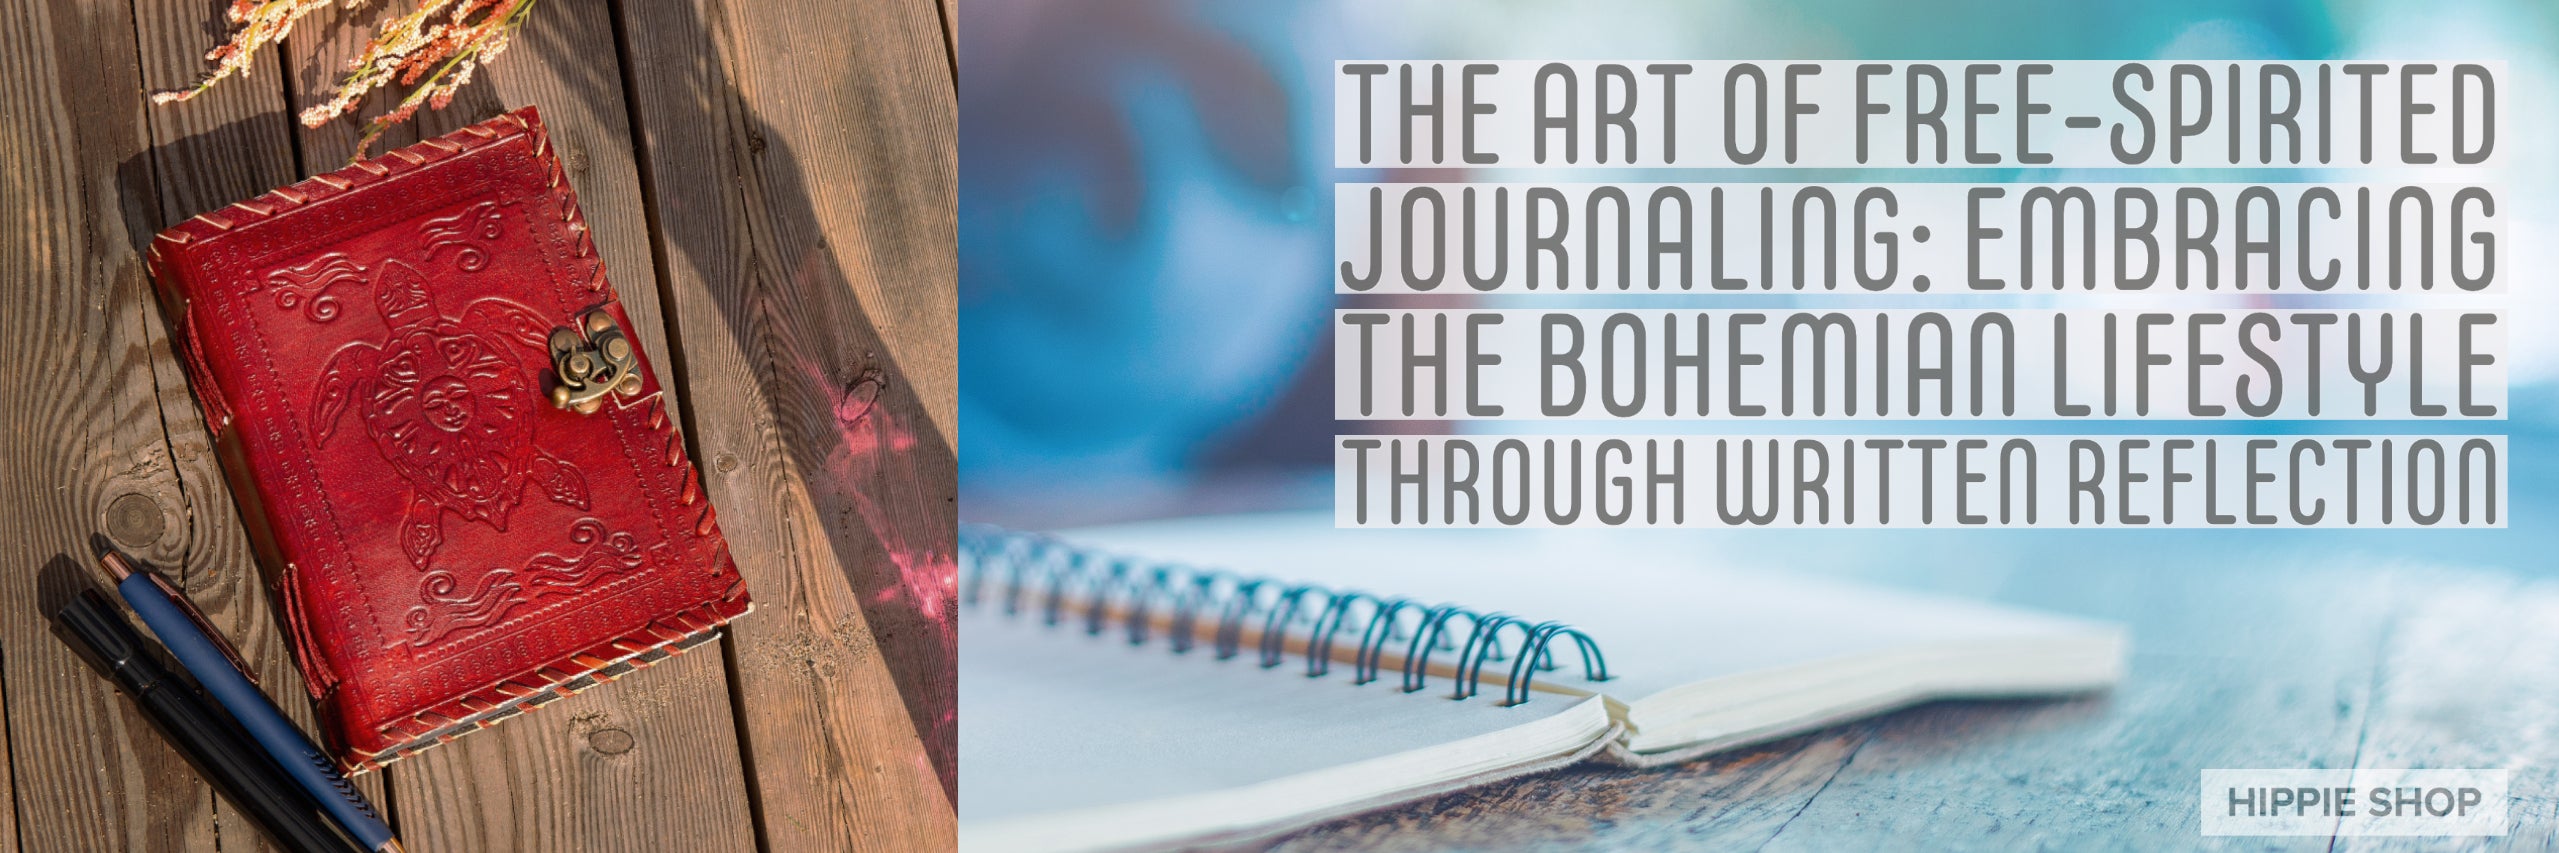 The Art of Free-Spirited Journaling: Embracing the Bohemian Lifestyle Through Written Reflection